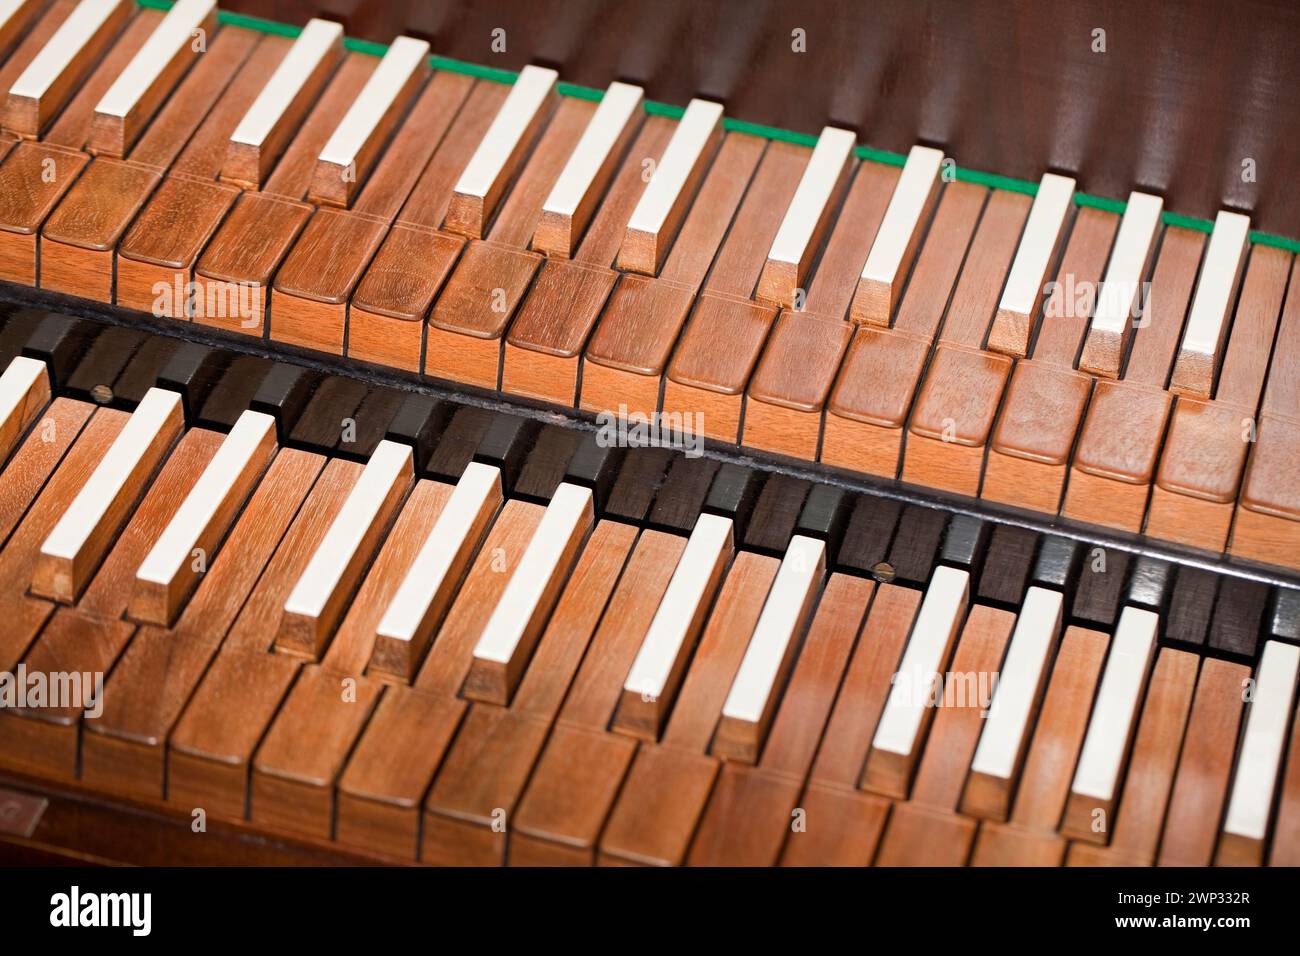 Tiancature of a harpsichord Stock Photo